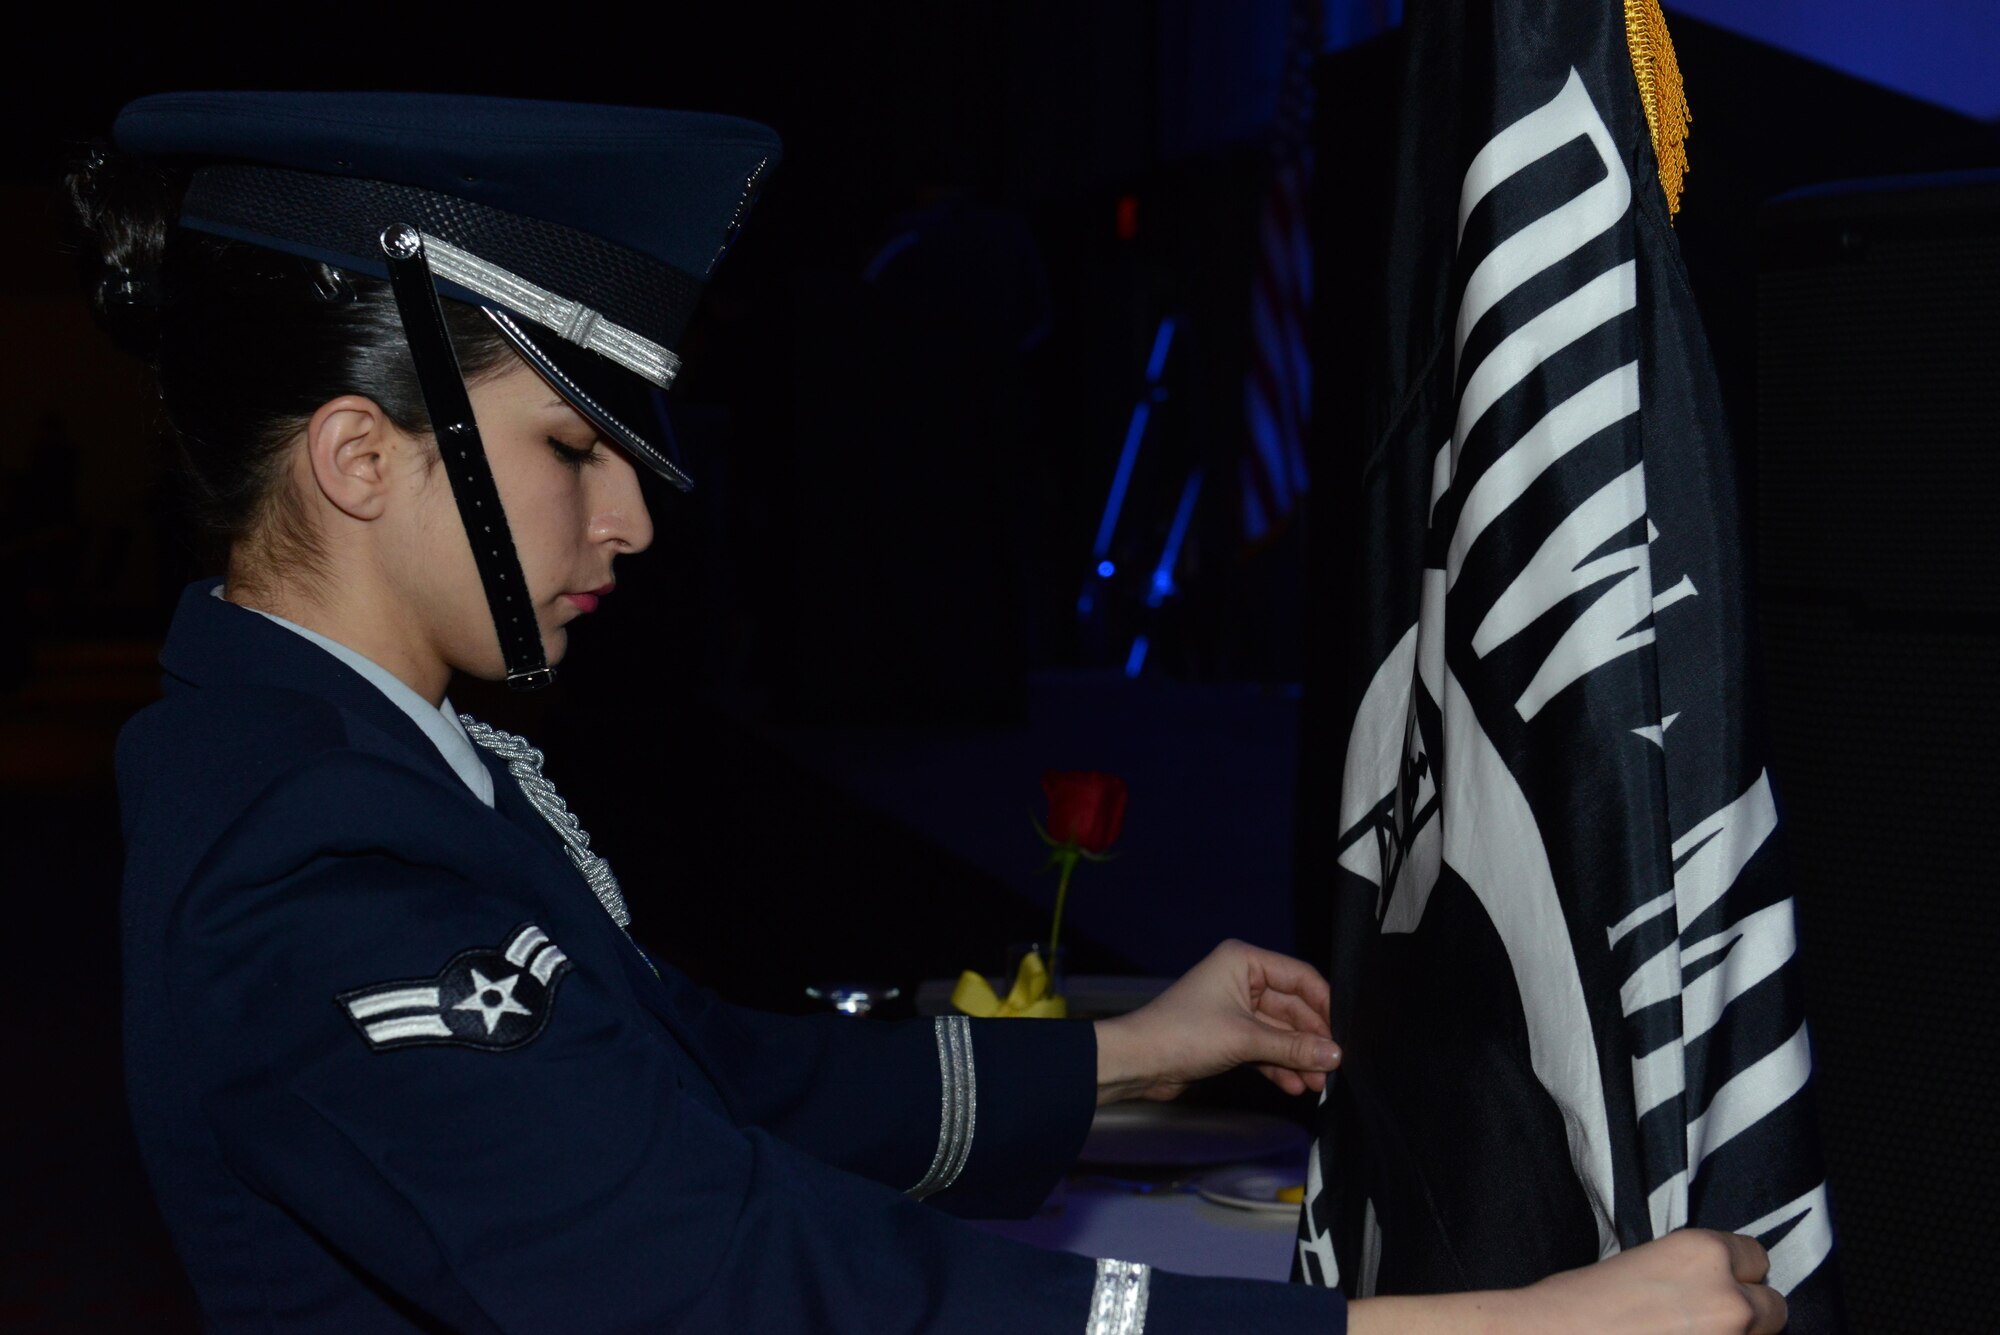 Airman 1st Class Tesla Saiz, Joint Base Elmendorf-Richardson honor guard, adjusts the Prisoners Of War/Missing In Action flag before the ceremony during the 2016 JBER Air Force Ball at the Anchorage Egan Center, Alaska, Sept. 24, 2016. This event marked the Air Force’s 69th birthday celebrating the Air Force’s heritage through reflection, ceremony and camaraderie.